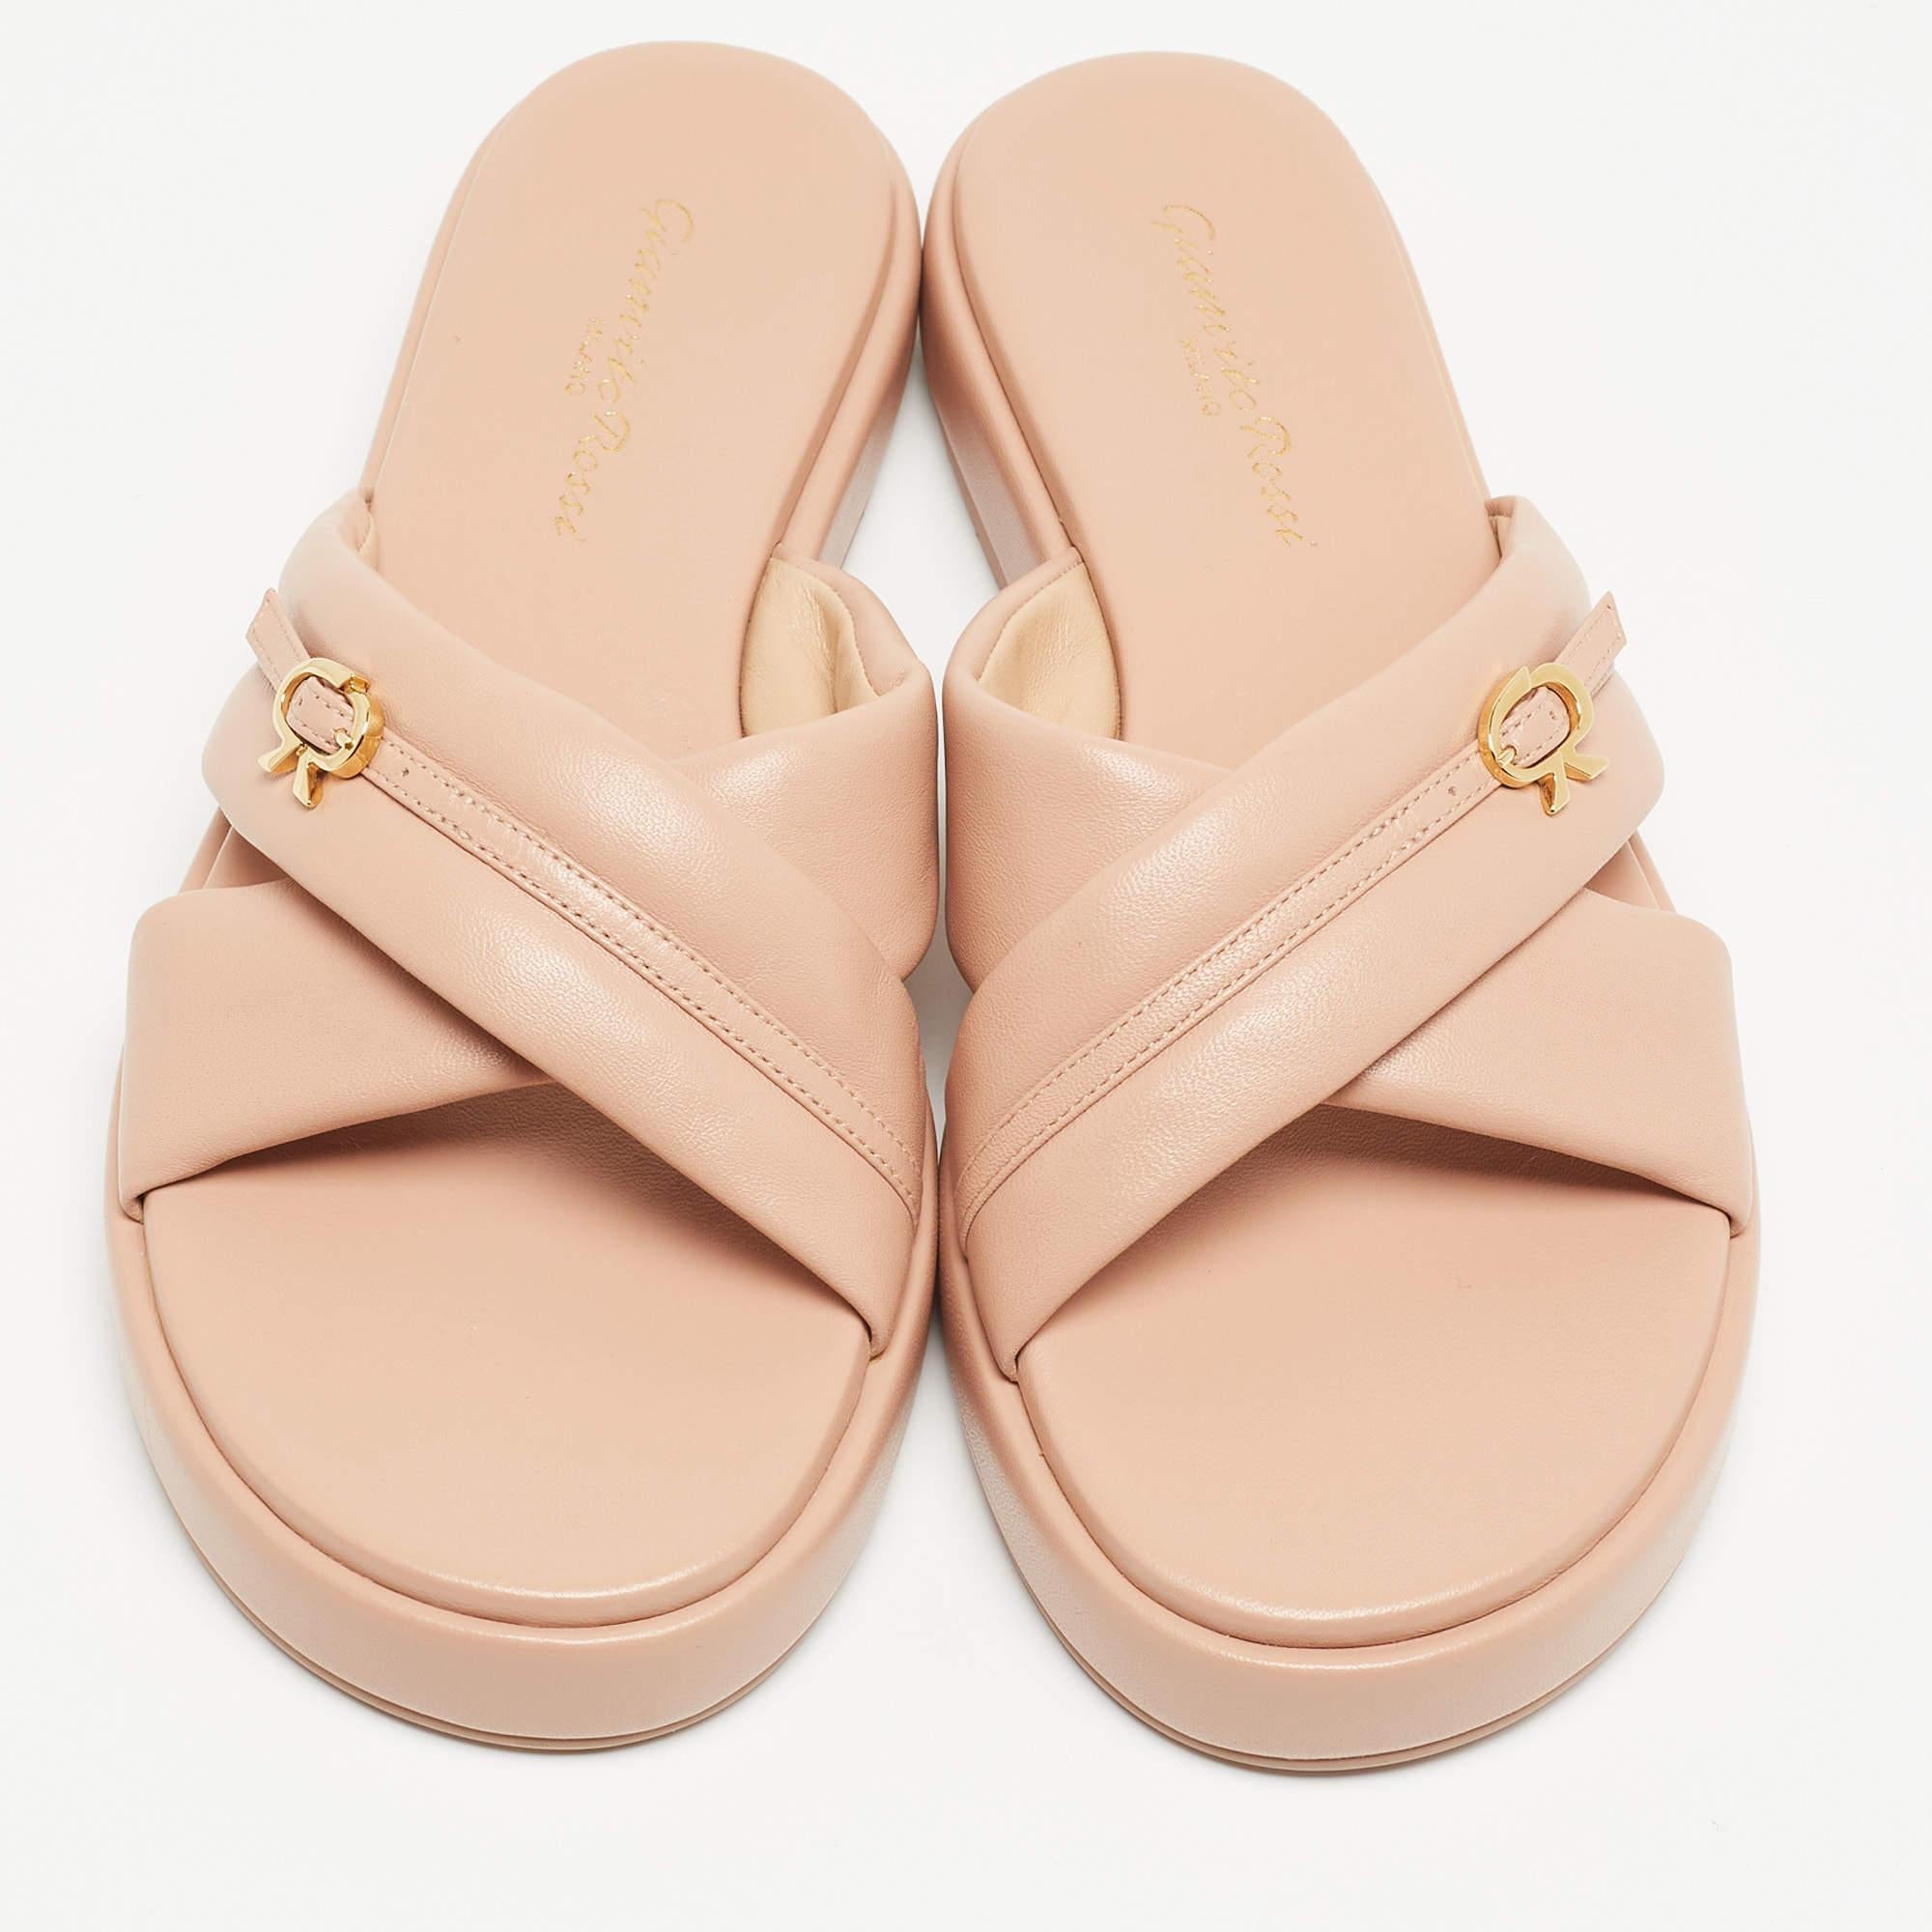 Enhance your casual looks with a touch of high style with these designer slides. Rendered in quality material with a lovely hue adorning its expanse, this pair is a must-have!

Includes: Original Dustbag, Original Box, Info Booklet

